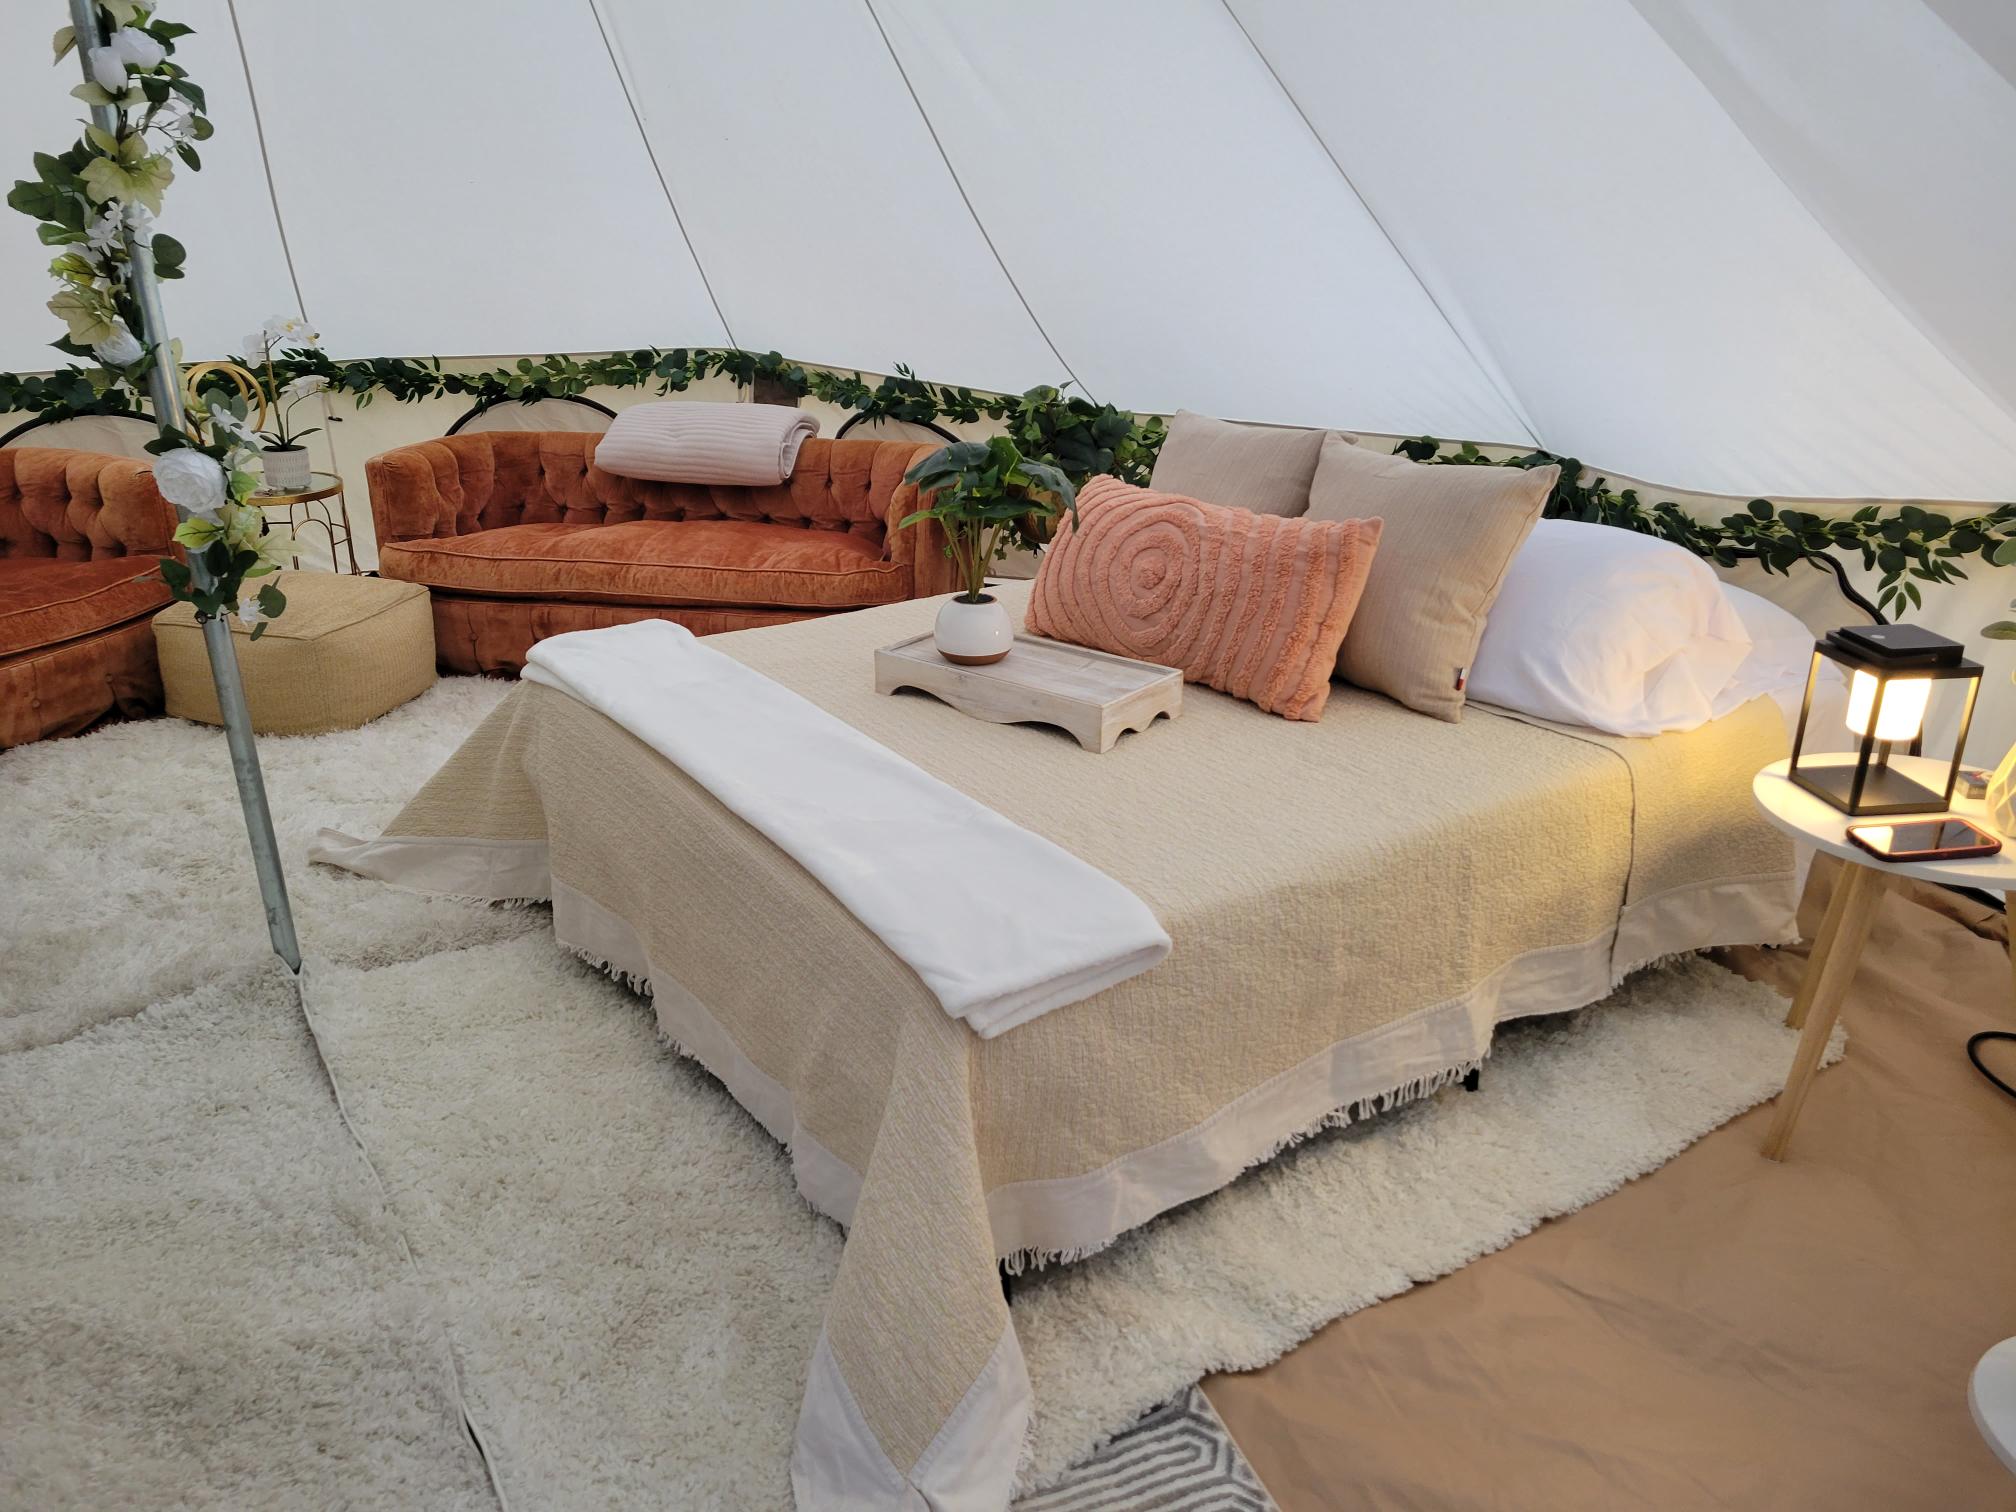 Relax and glamp ‘Under the Stars’